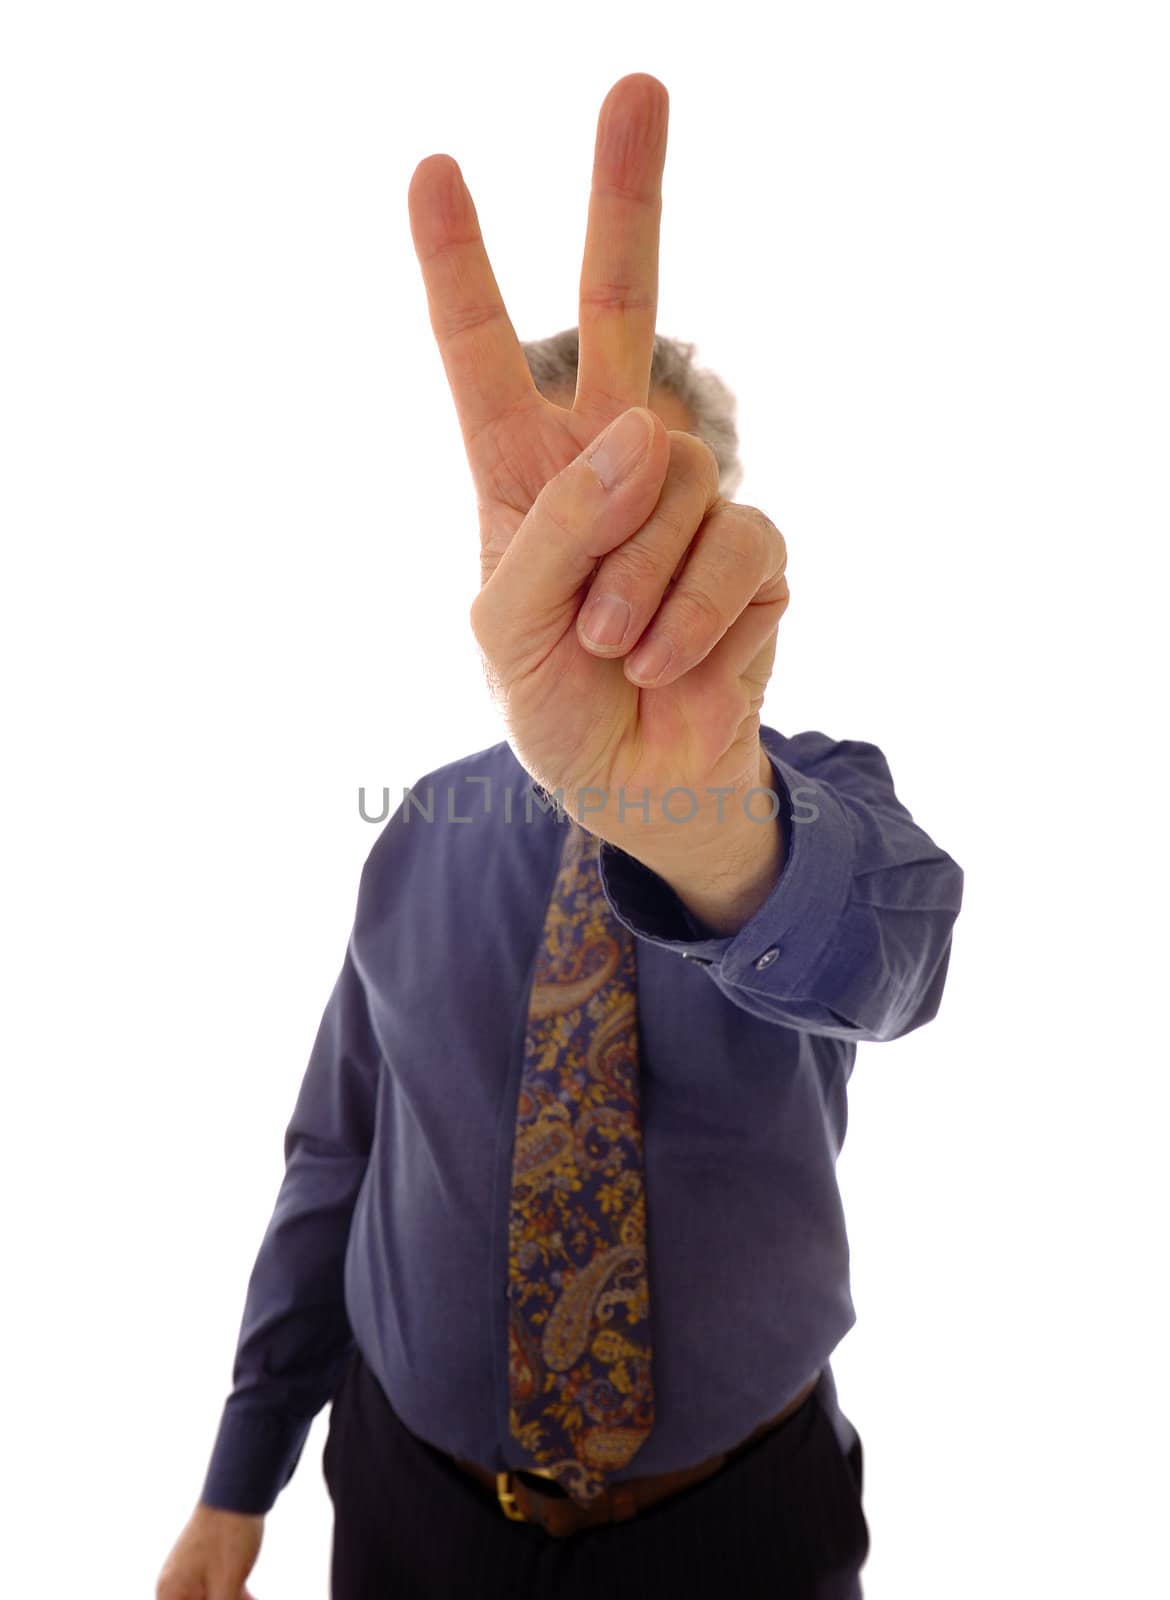 A senior businessman, in shirtsleeves, giving a victory 'V' sign (or indicating the number 2).